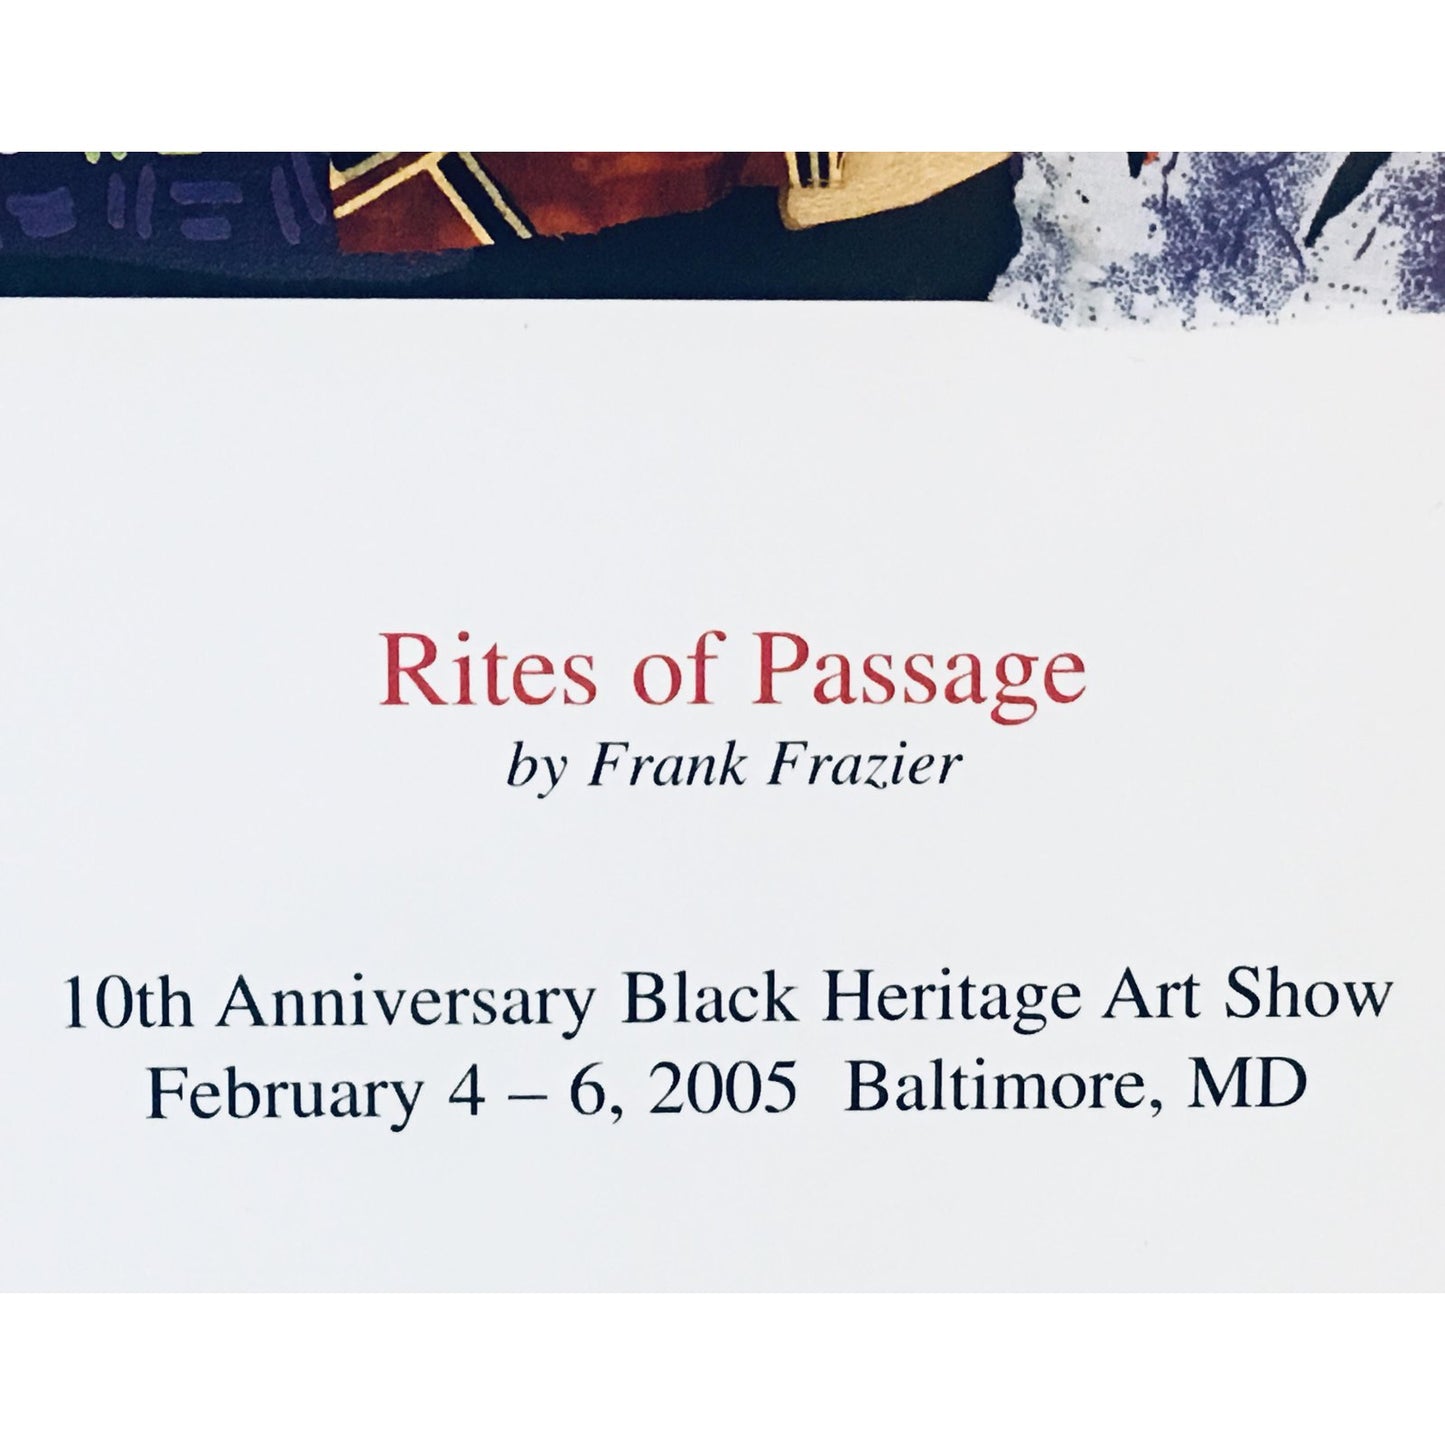 Modern African American Heritage Art Show “Rites of Passage” Poster Print by Frank Frazier